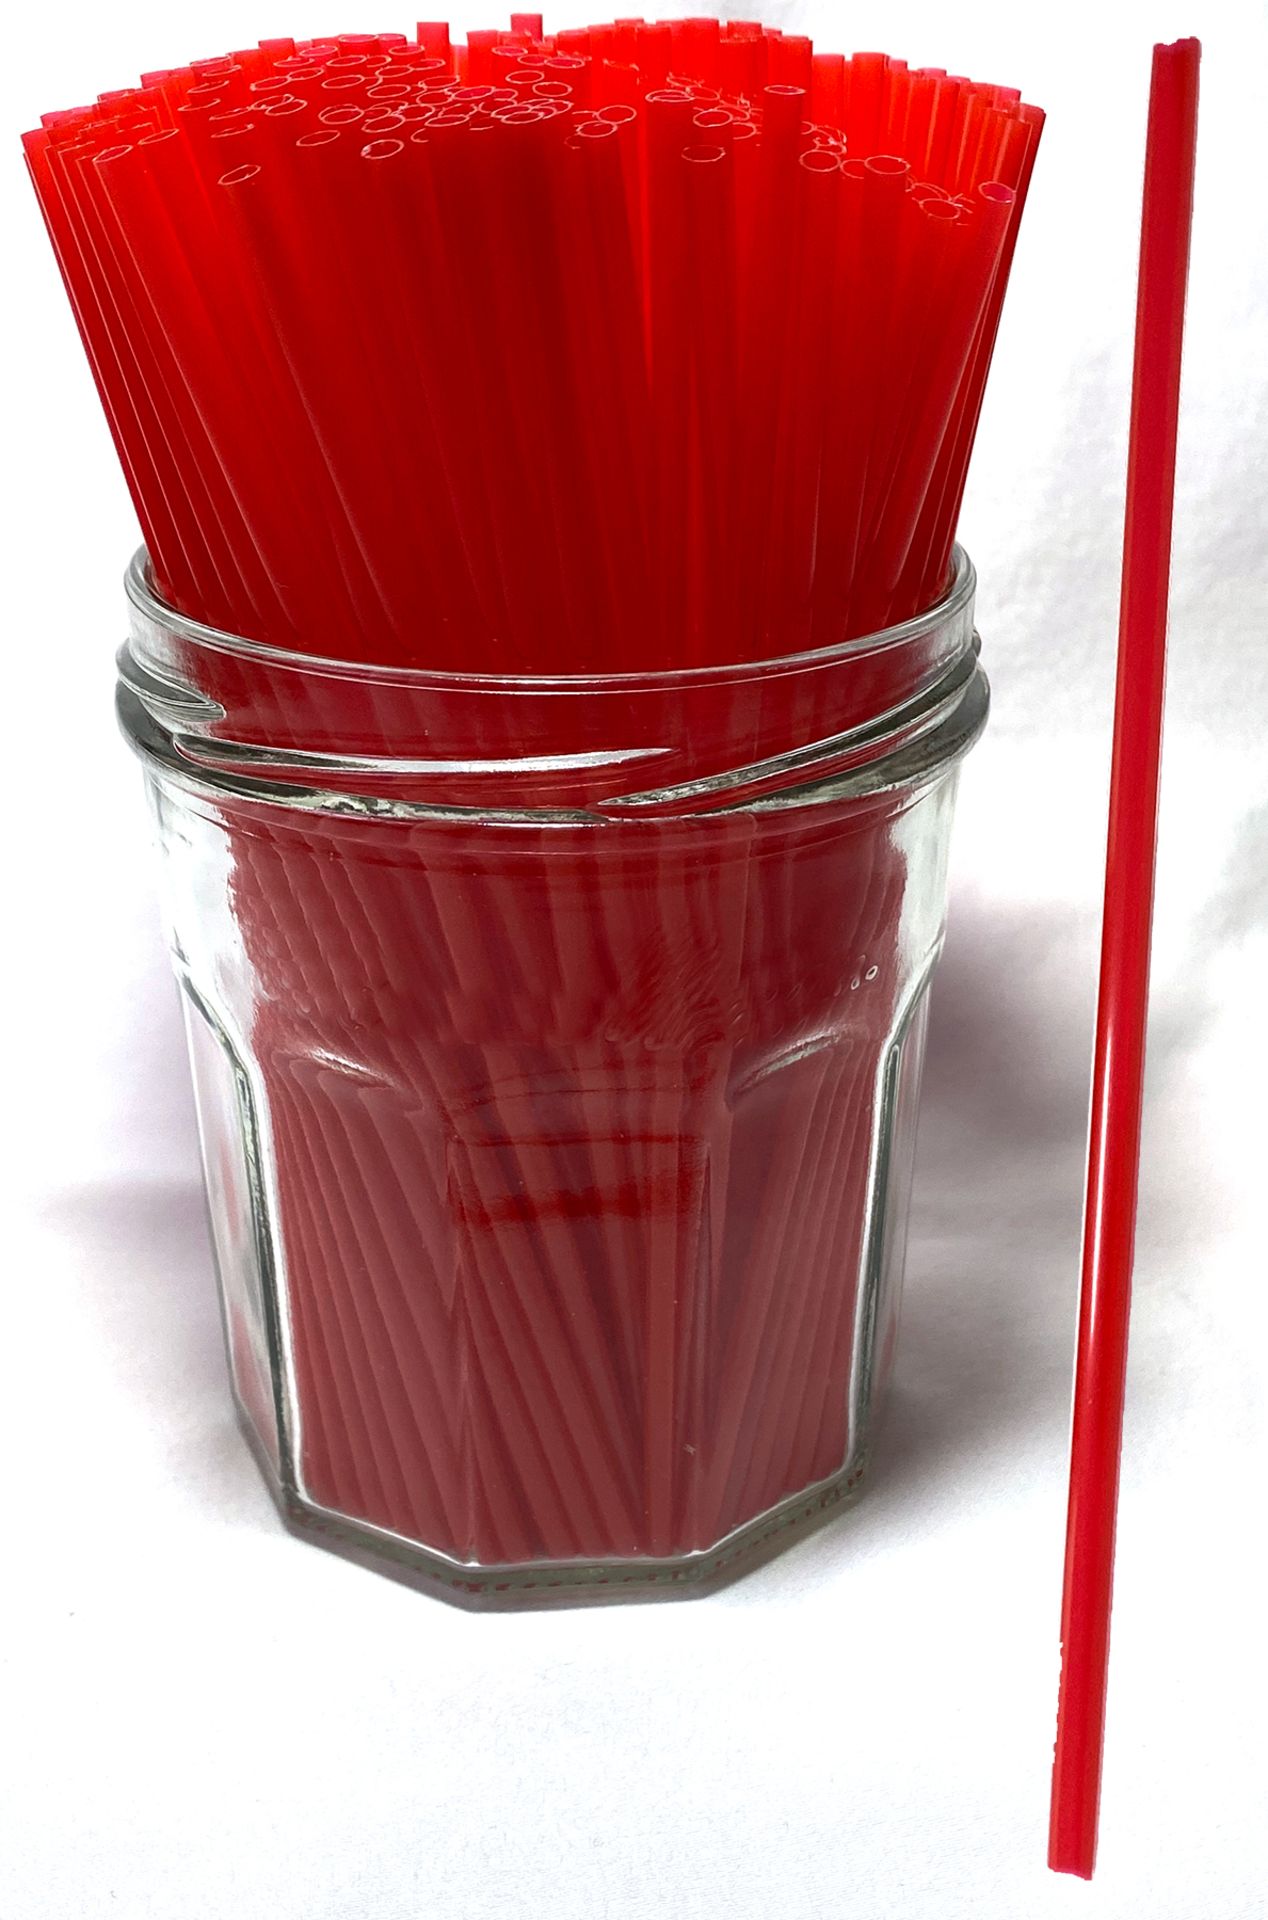 5 x Boxes of Red Sip Straws by 888 Gastro Disposables - Image 2 of 3